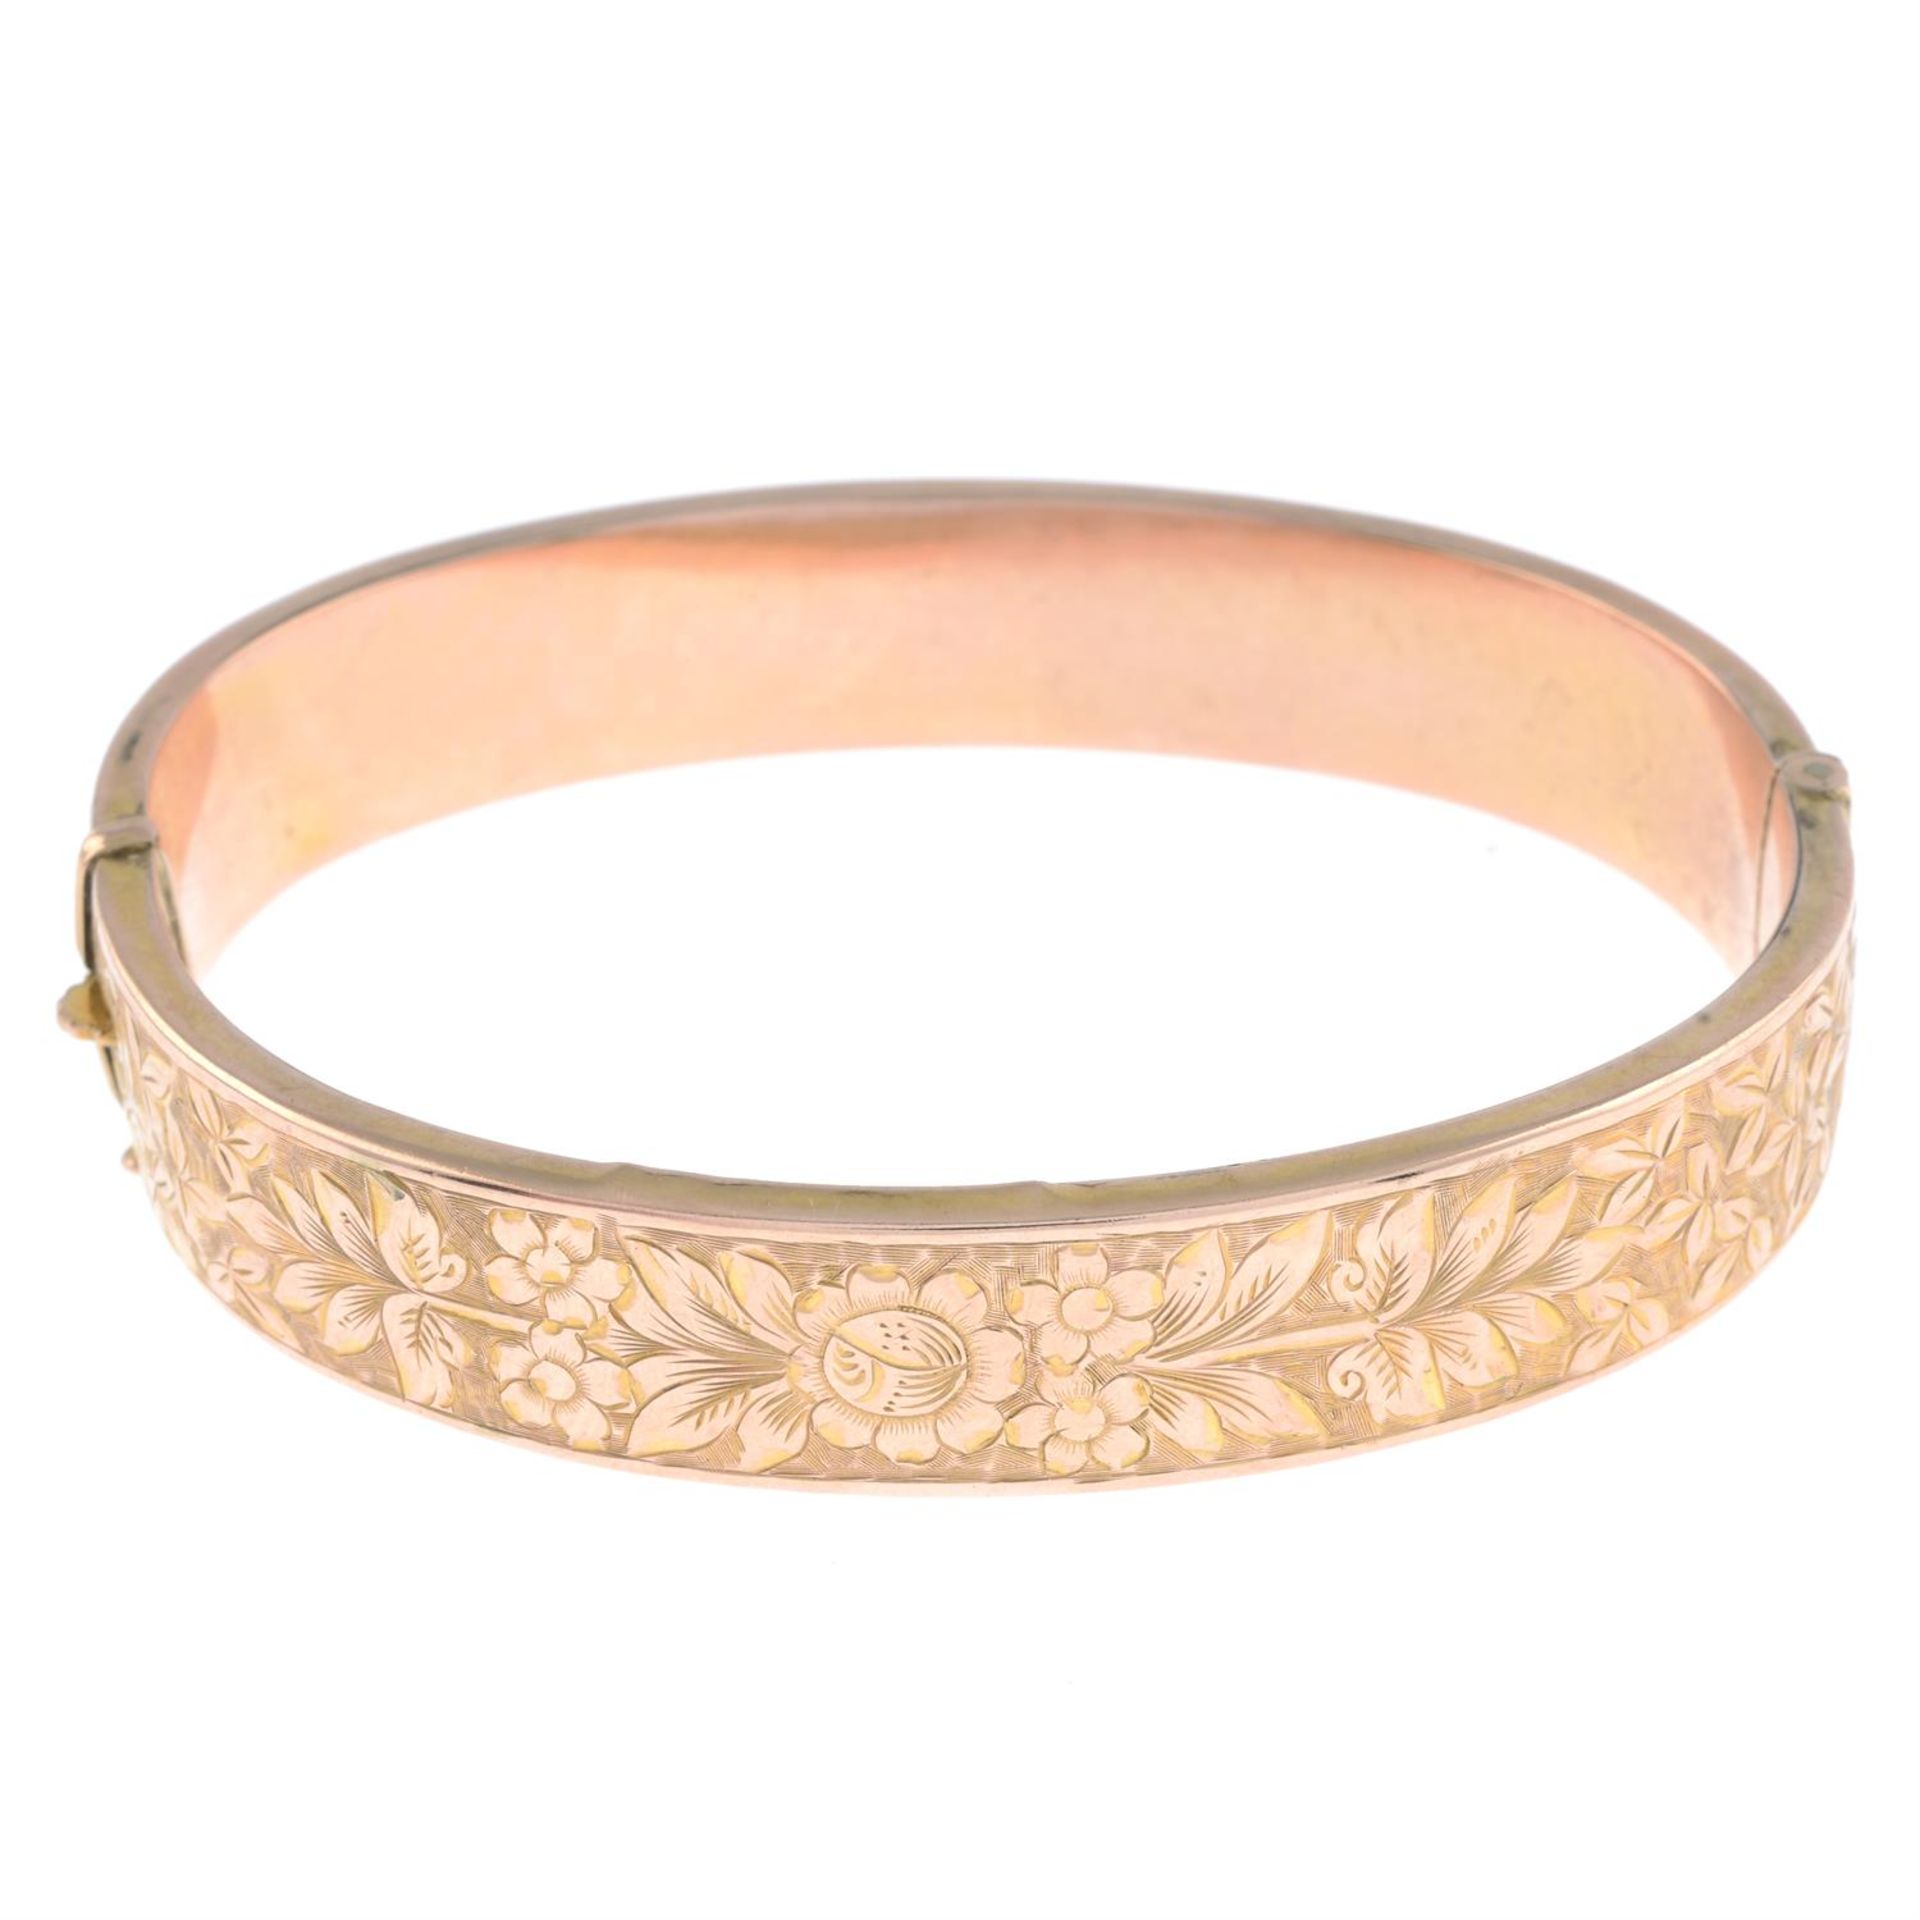 Early 20th century bangle, Smith & Pepper